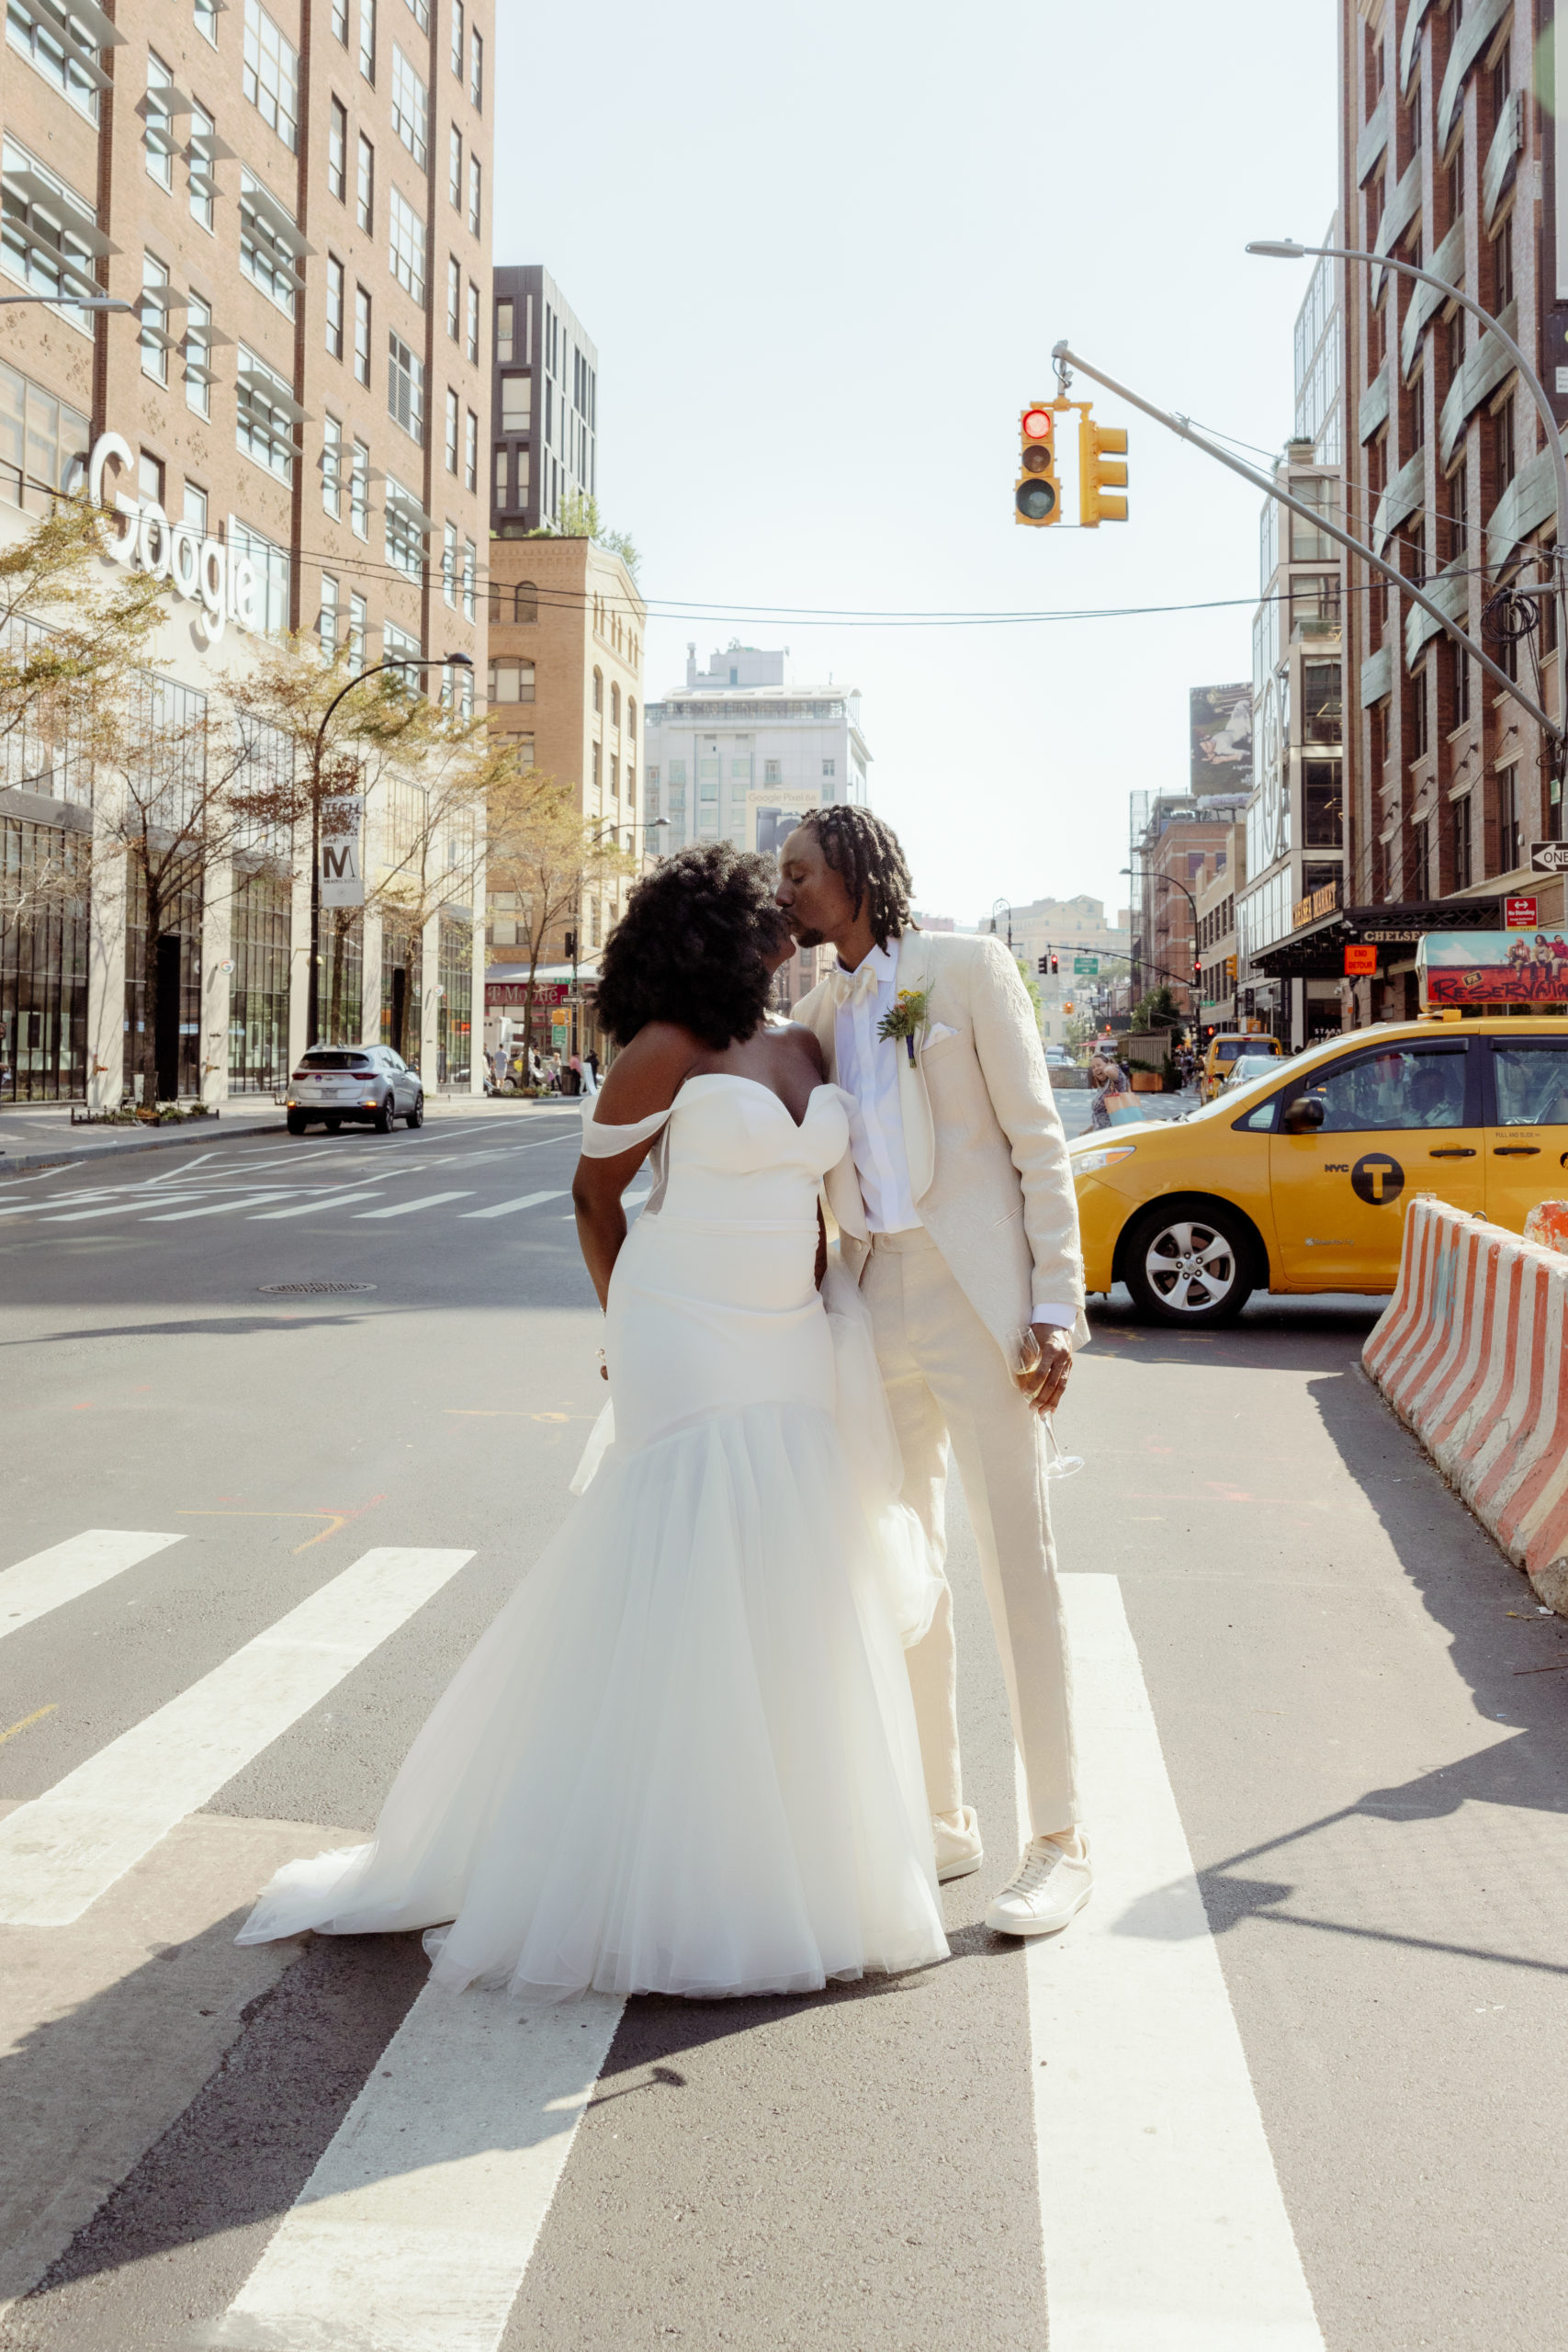 The newly-wed couple is kissing in the streets of NYC with a yellow cab in the background. Editorial elopement image by Jenny Fu Studio